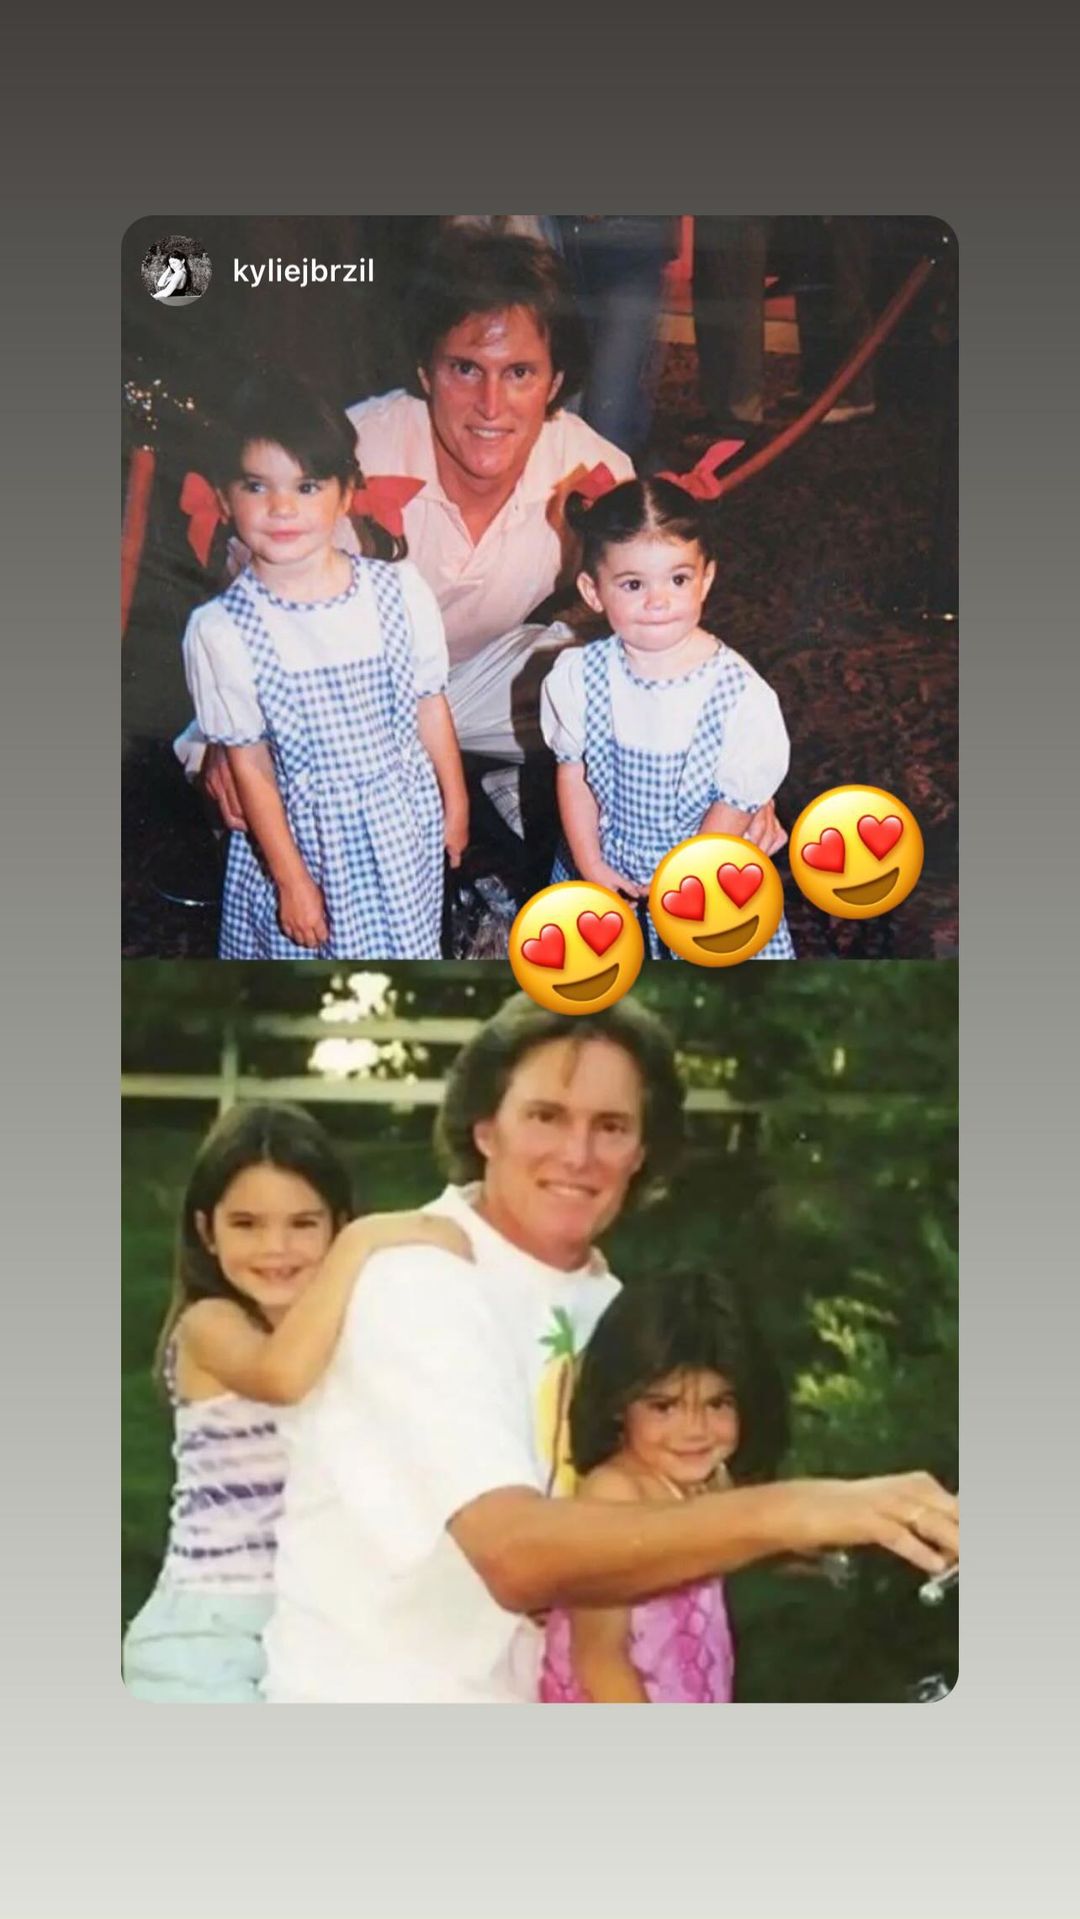 Kourtney Kardashian was the only member of the famous family to recognize Caitlyn, commenting a heart emoji on her latest post